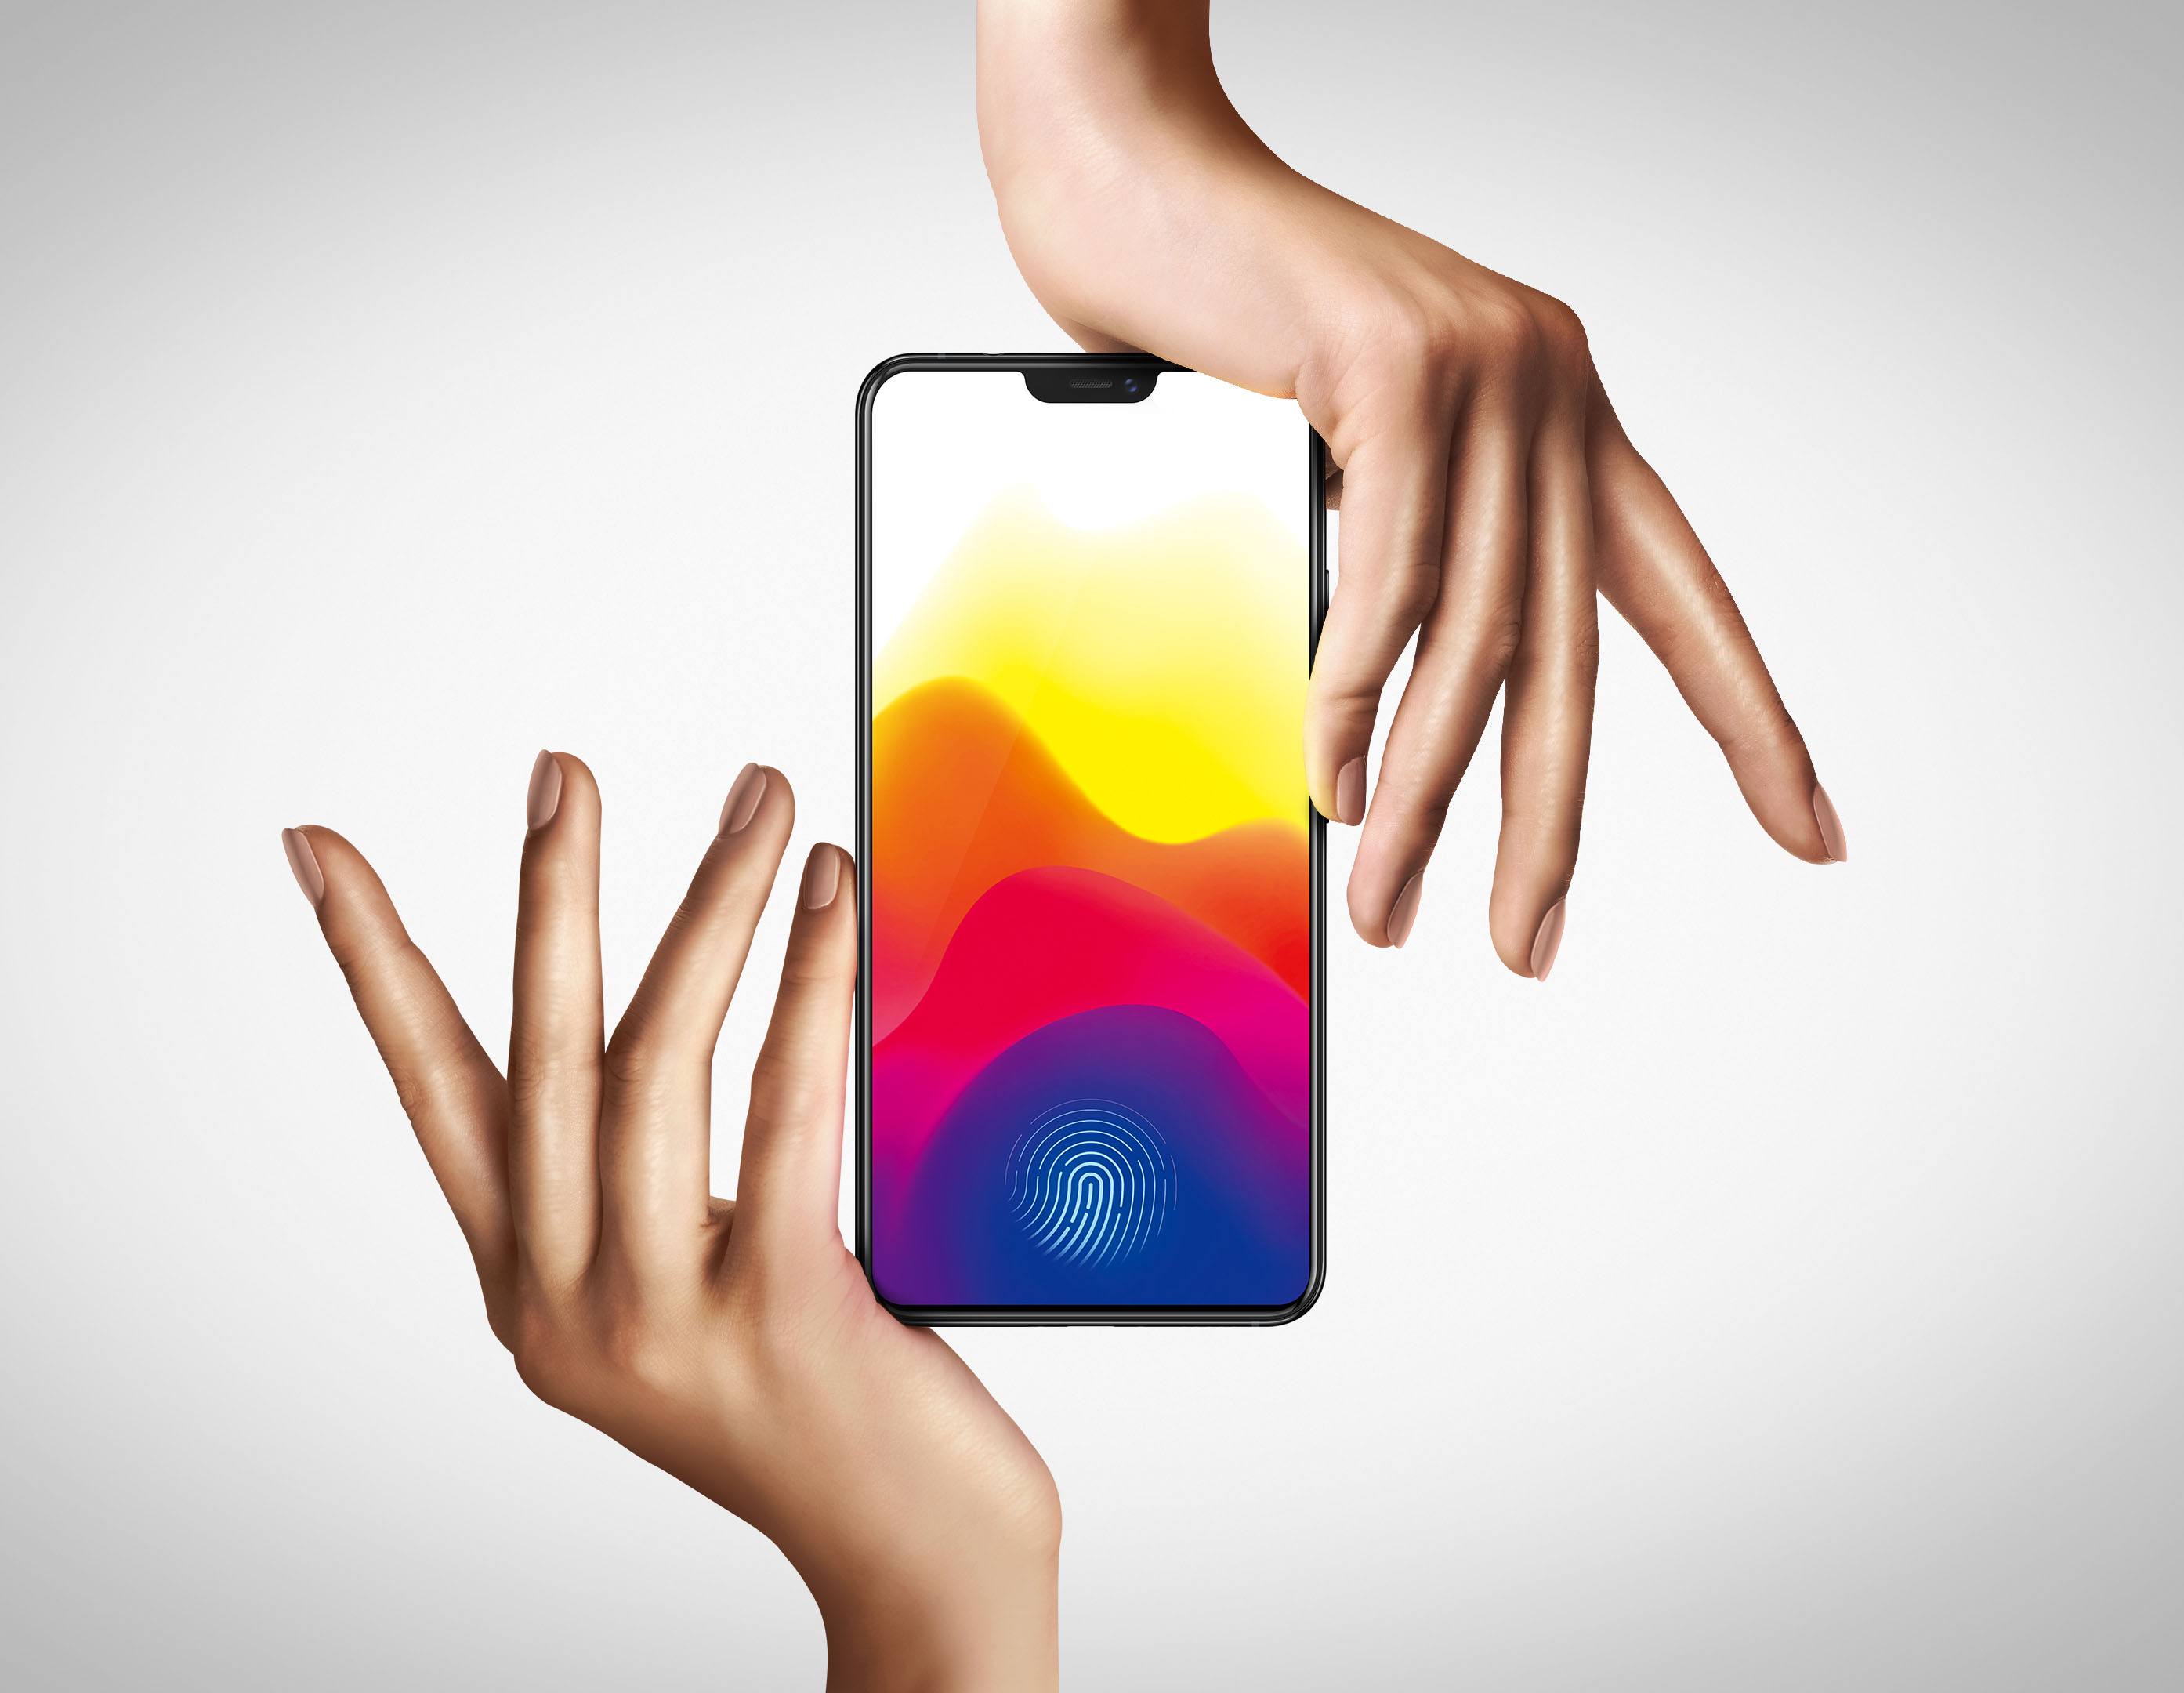 Vivo’s latest flagship smartphone X21 to introduce In-Display Fingerprint Scanning Technology